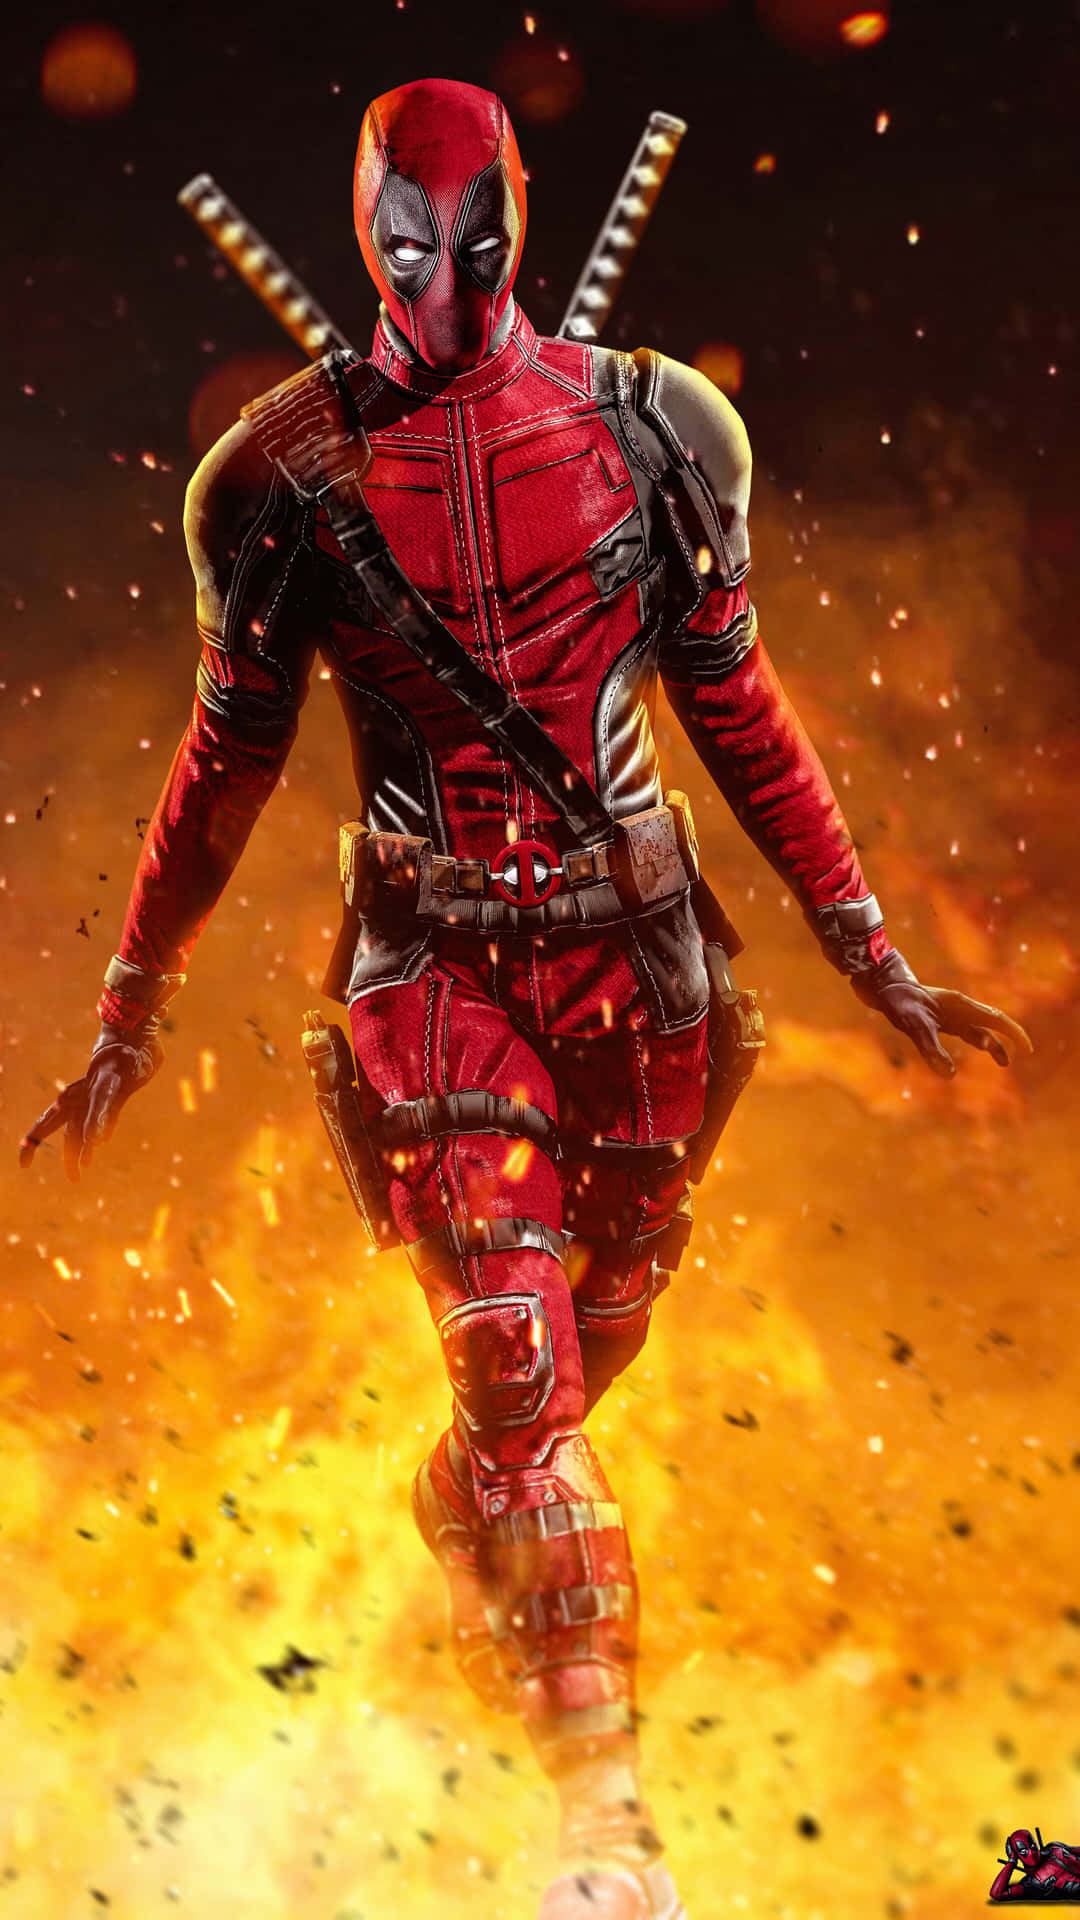 Deadpool Background Walking In The Middle Of Explosion